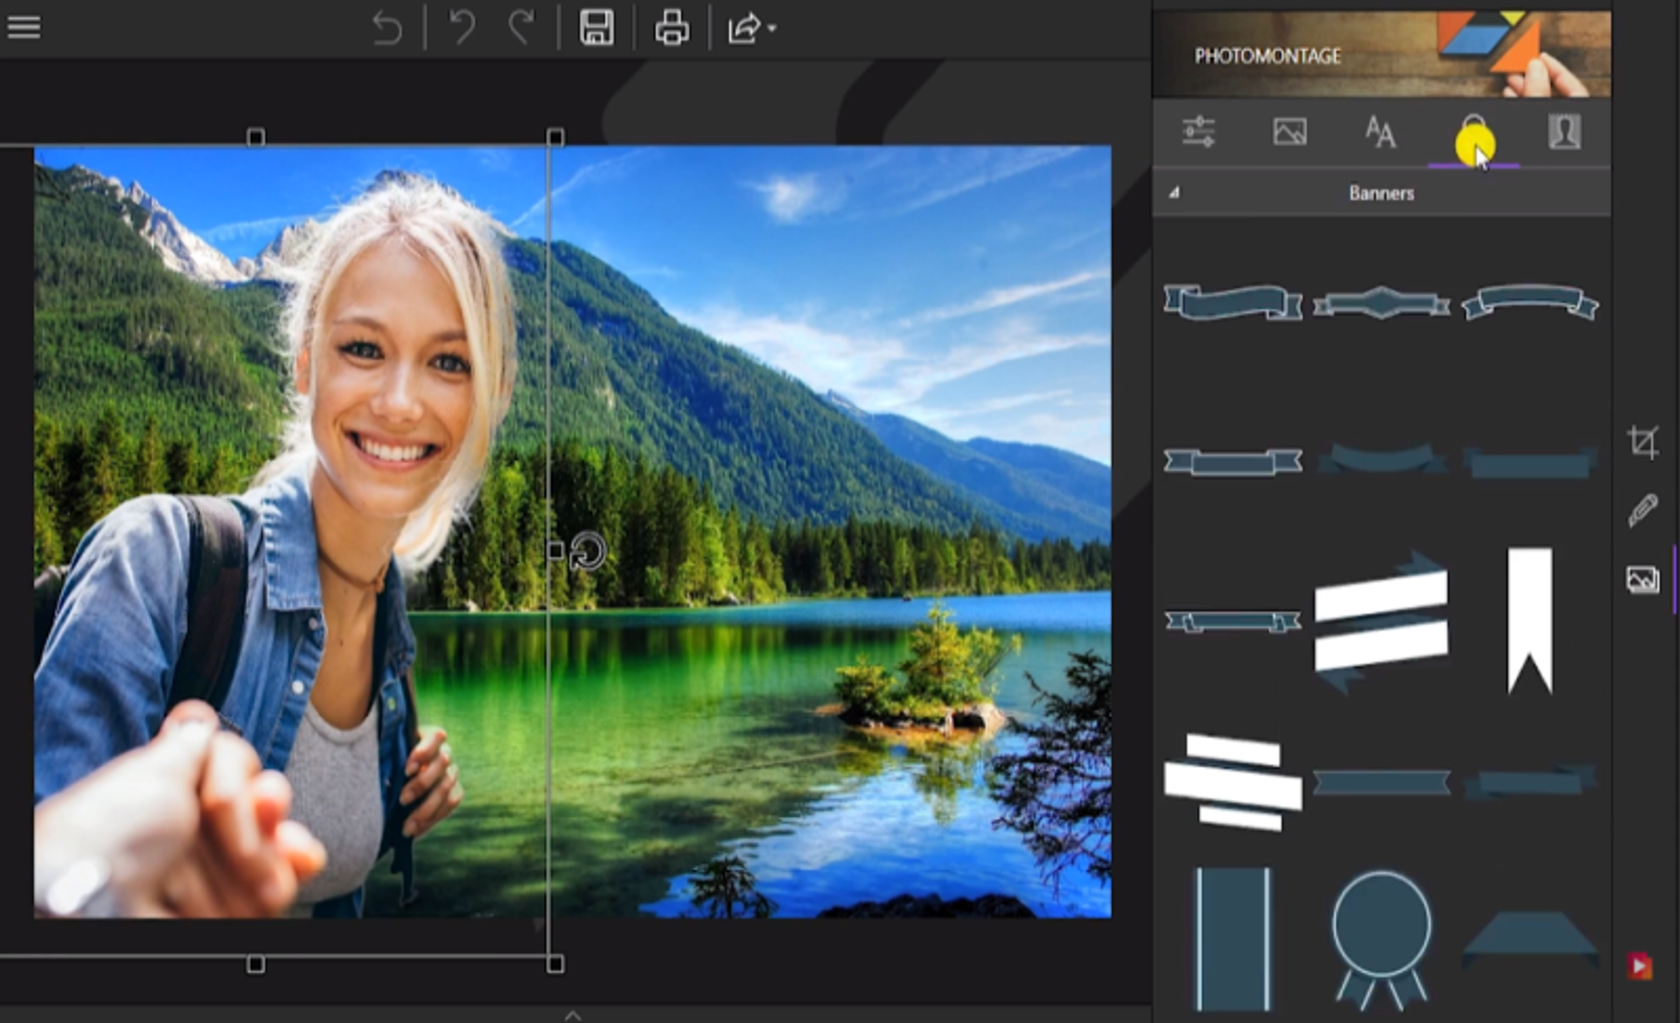 3d photo editor software free download for pc lil bibby free crack mixtape download